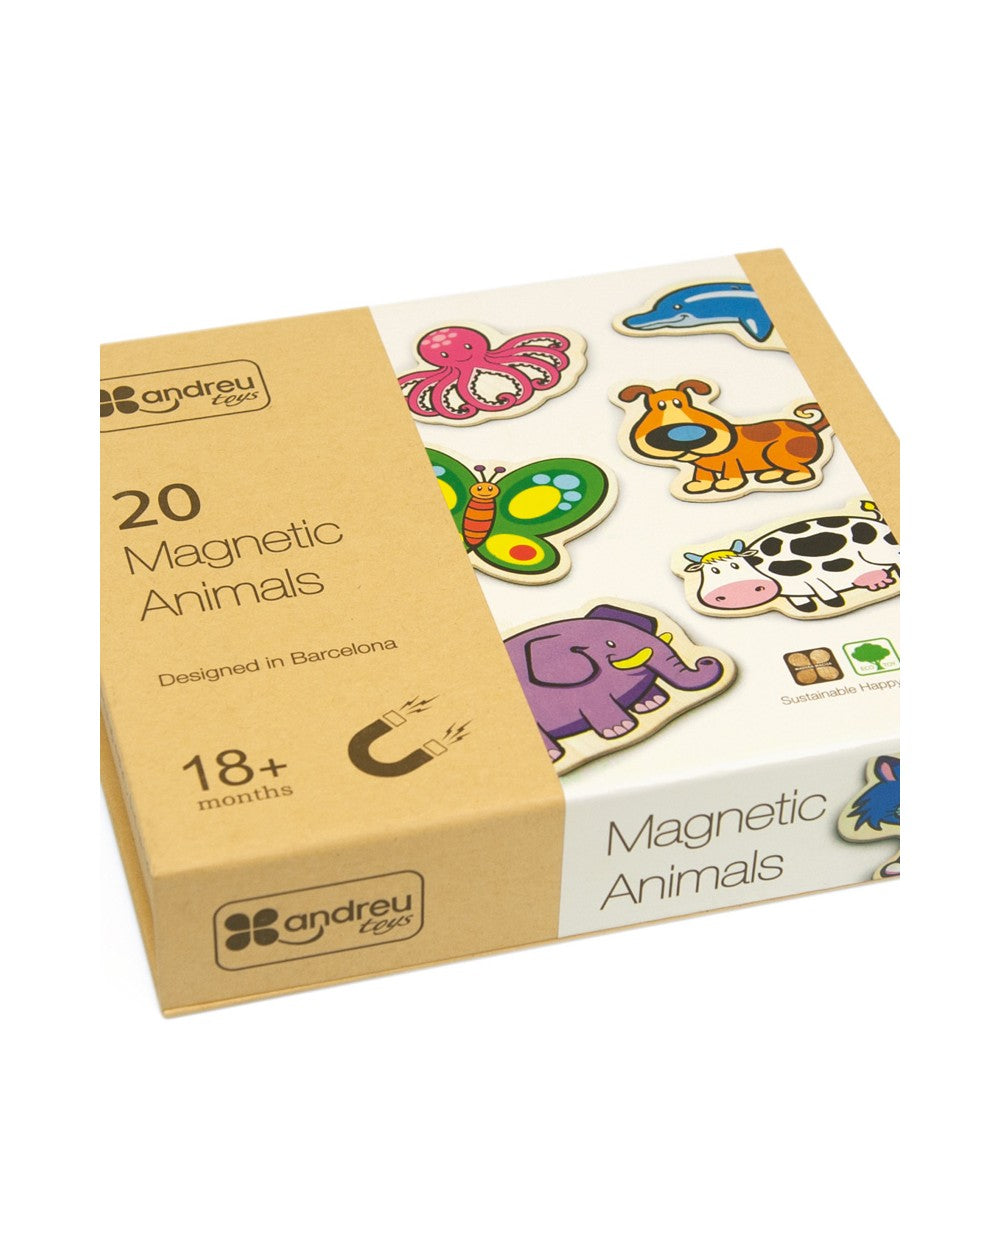 20 MAGNETIC ANIMALS Andreu Toys